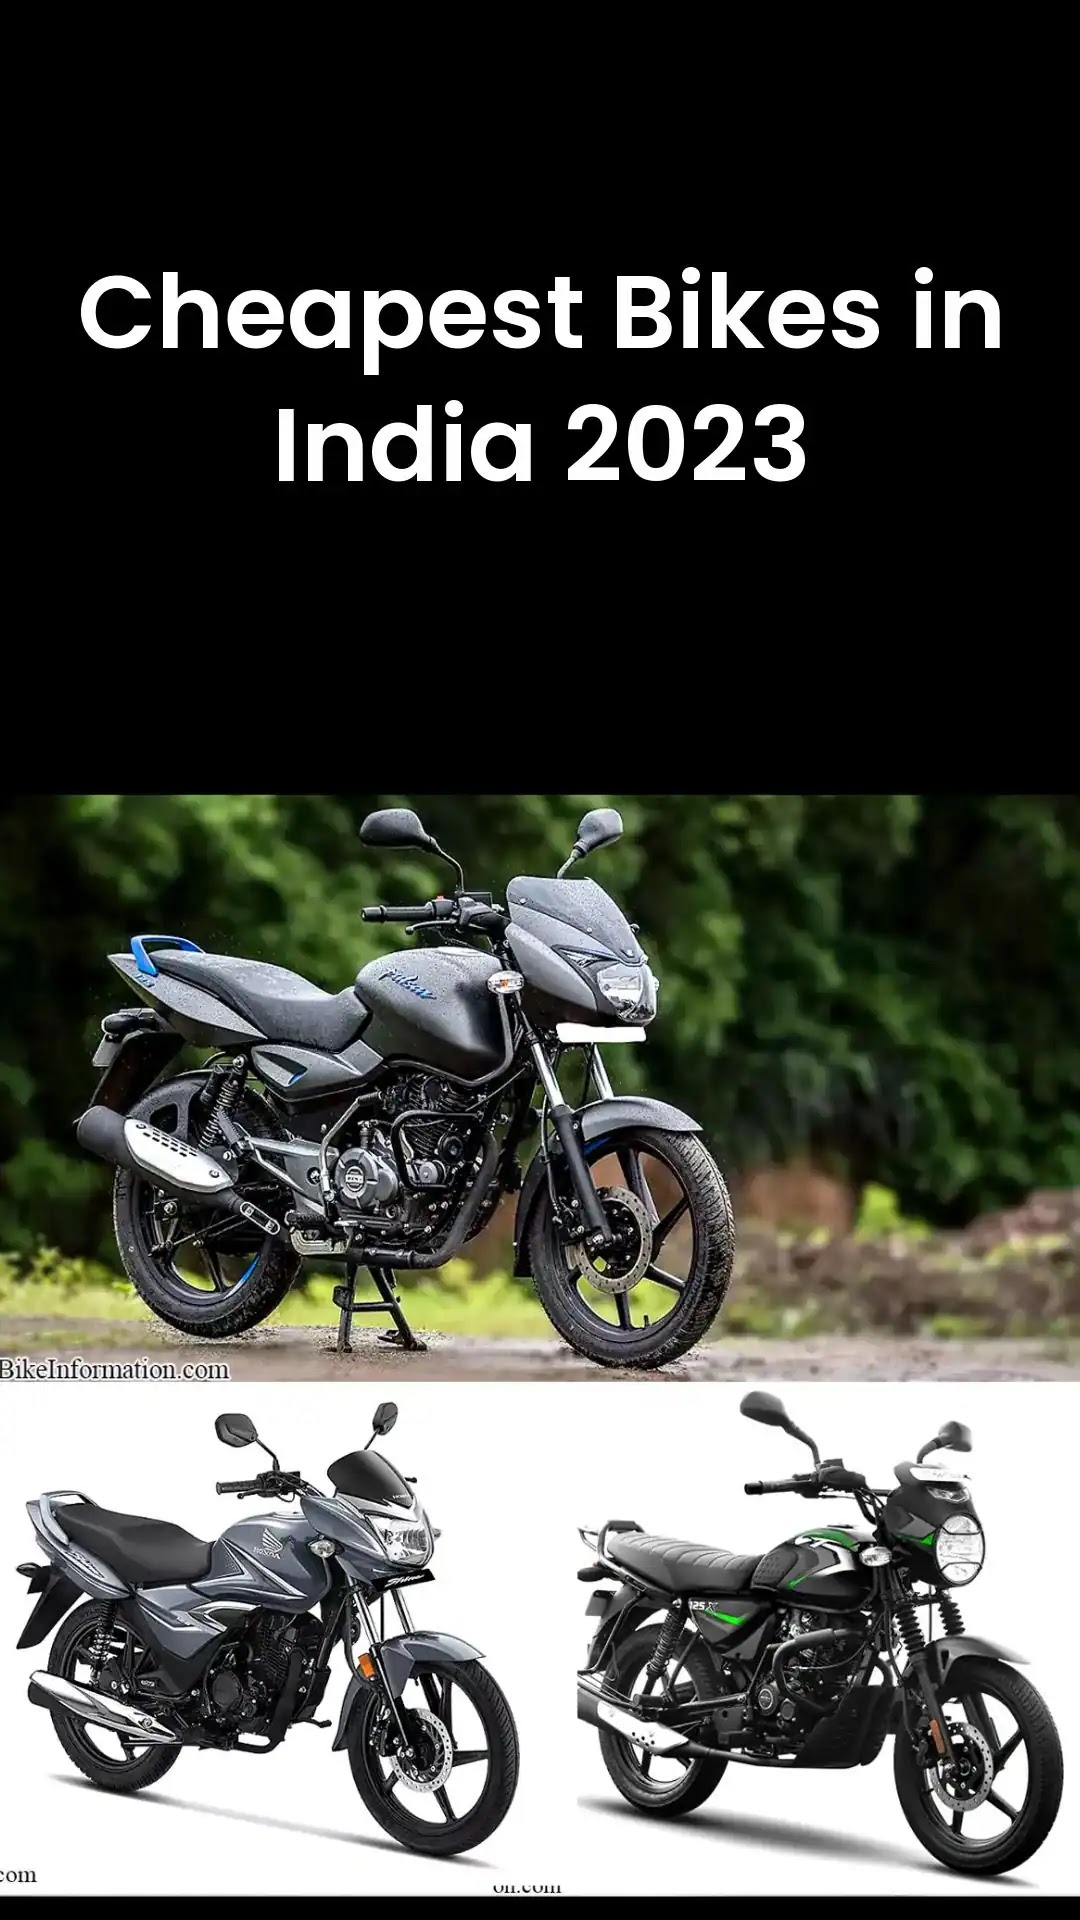 Cheapest Bikes in India 2023